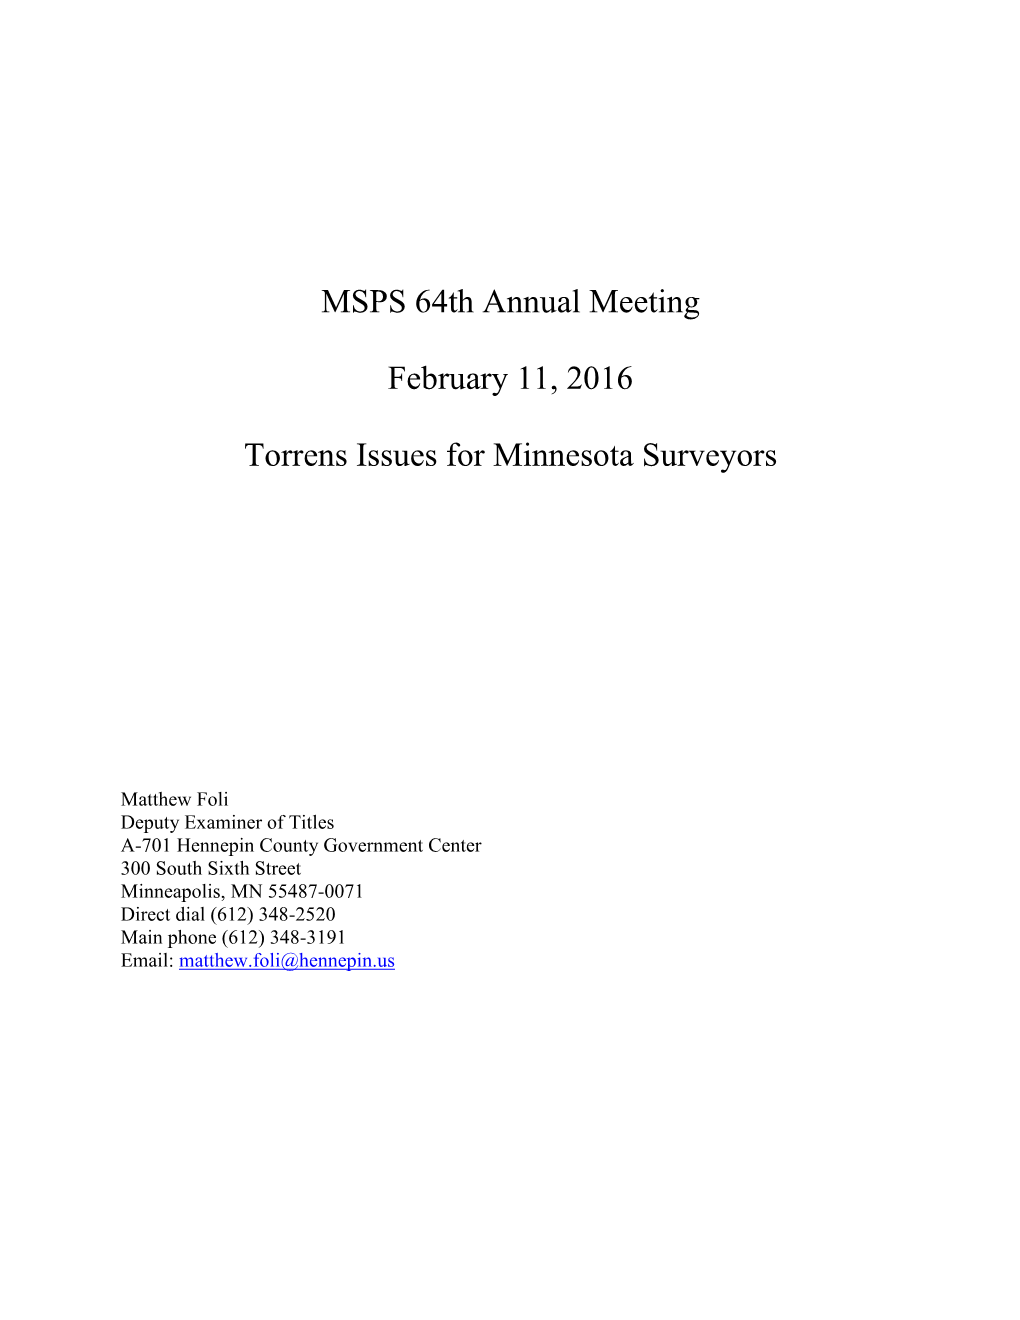 MSPS 64Th Annual Meeting February 11, 2016 Torrens Issues For